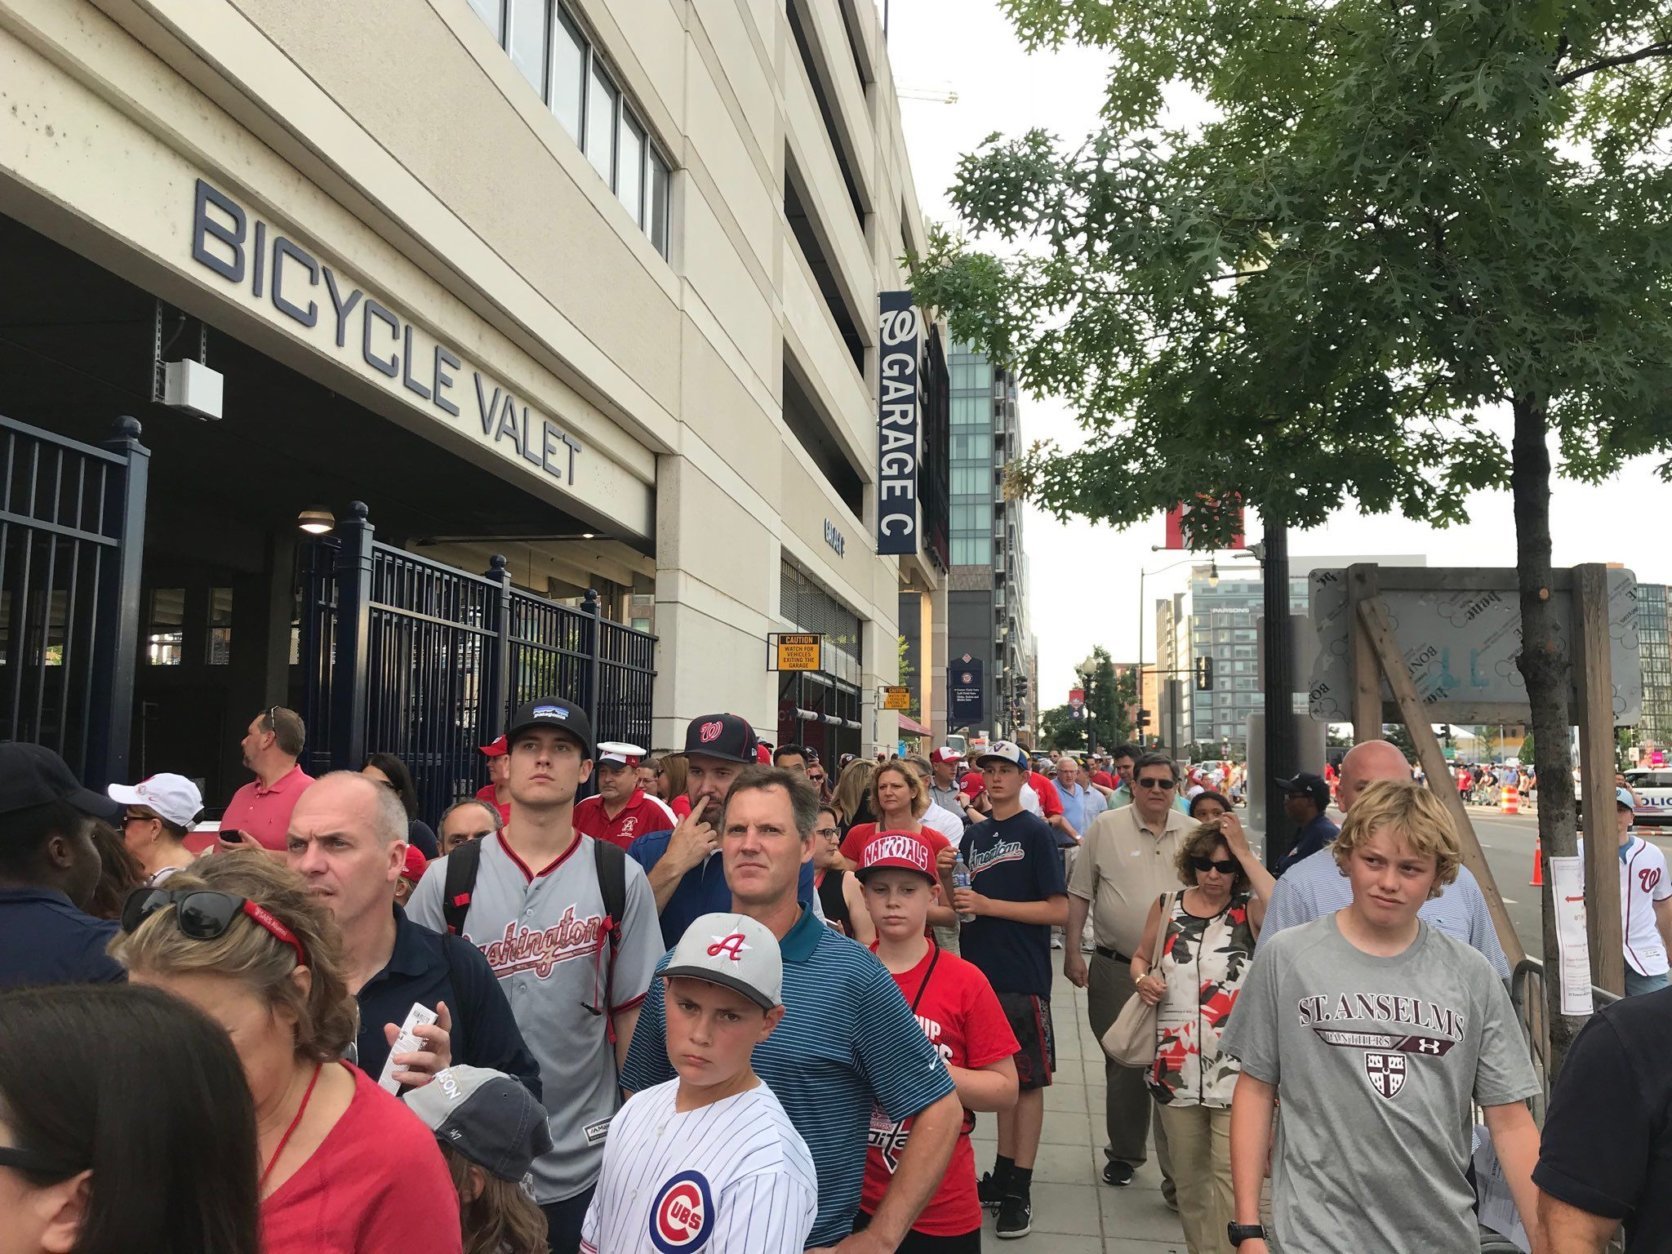 Fans line up to get into Nationals Park for the Home Run Derby on Monday, July 16, 2018 in Washington, D.C. (WTOP/Dick Uliano)